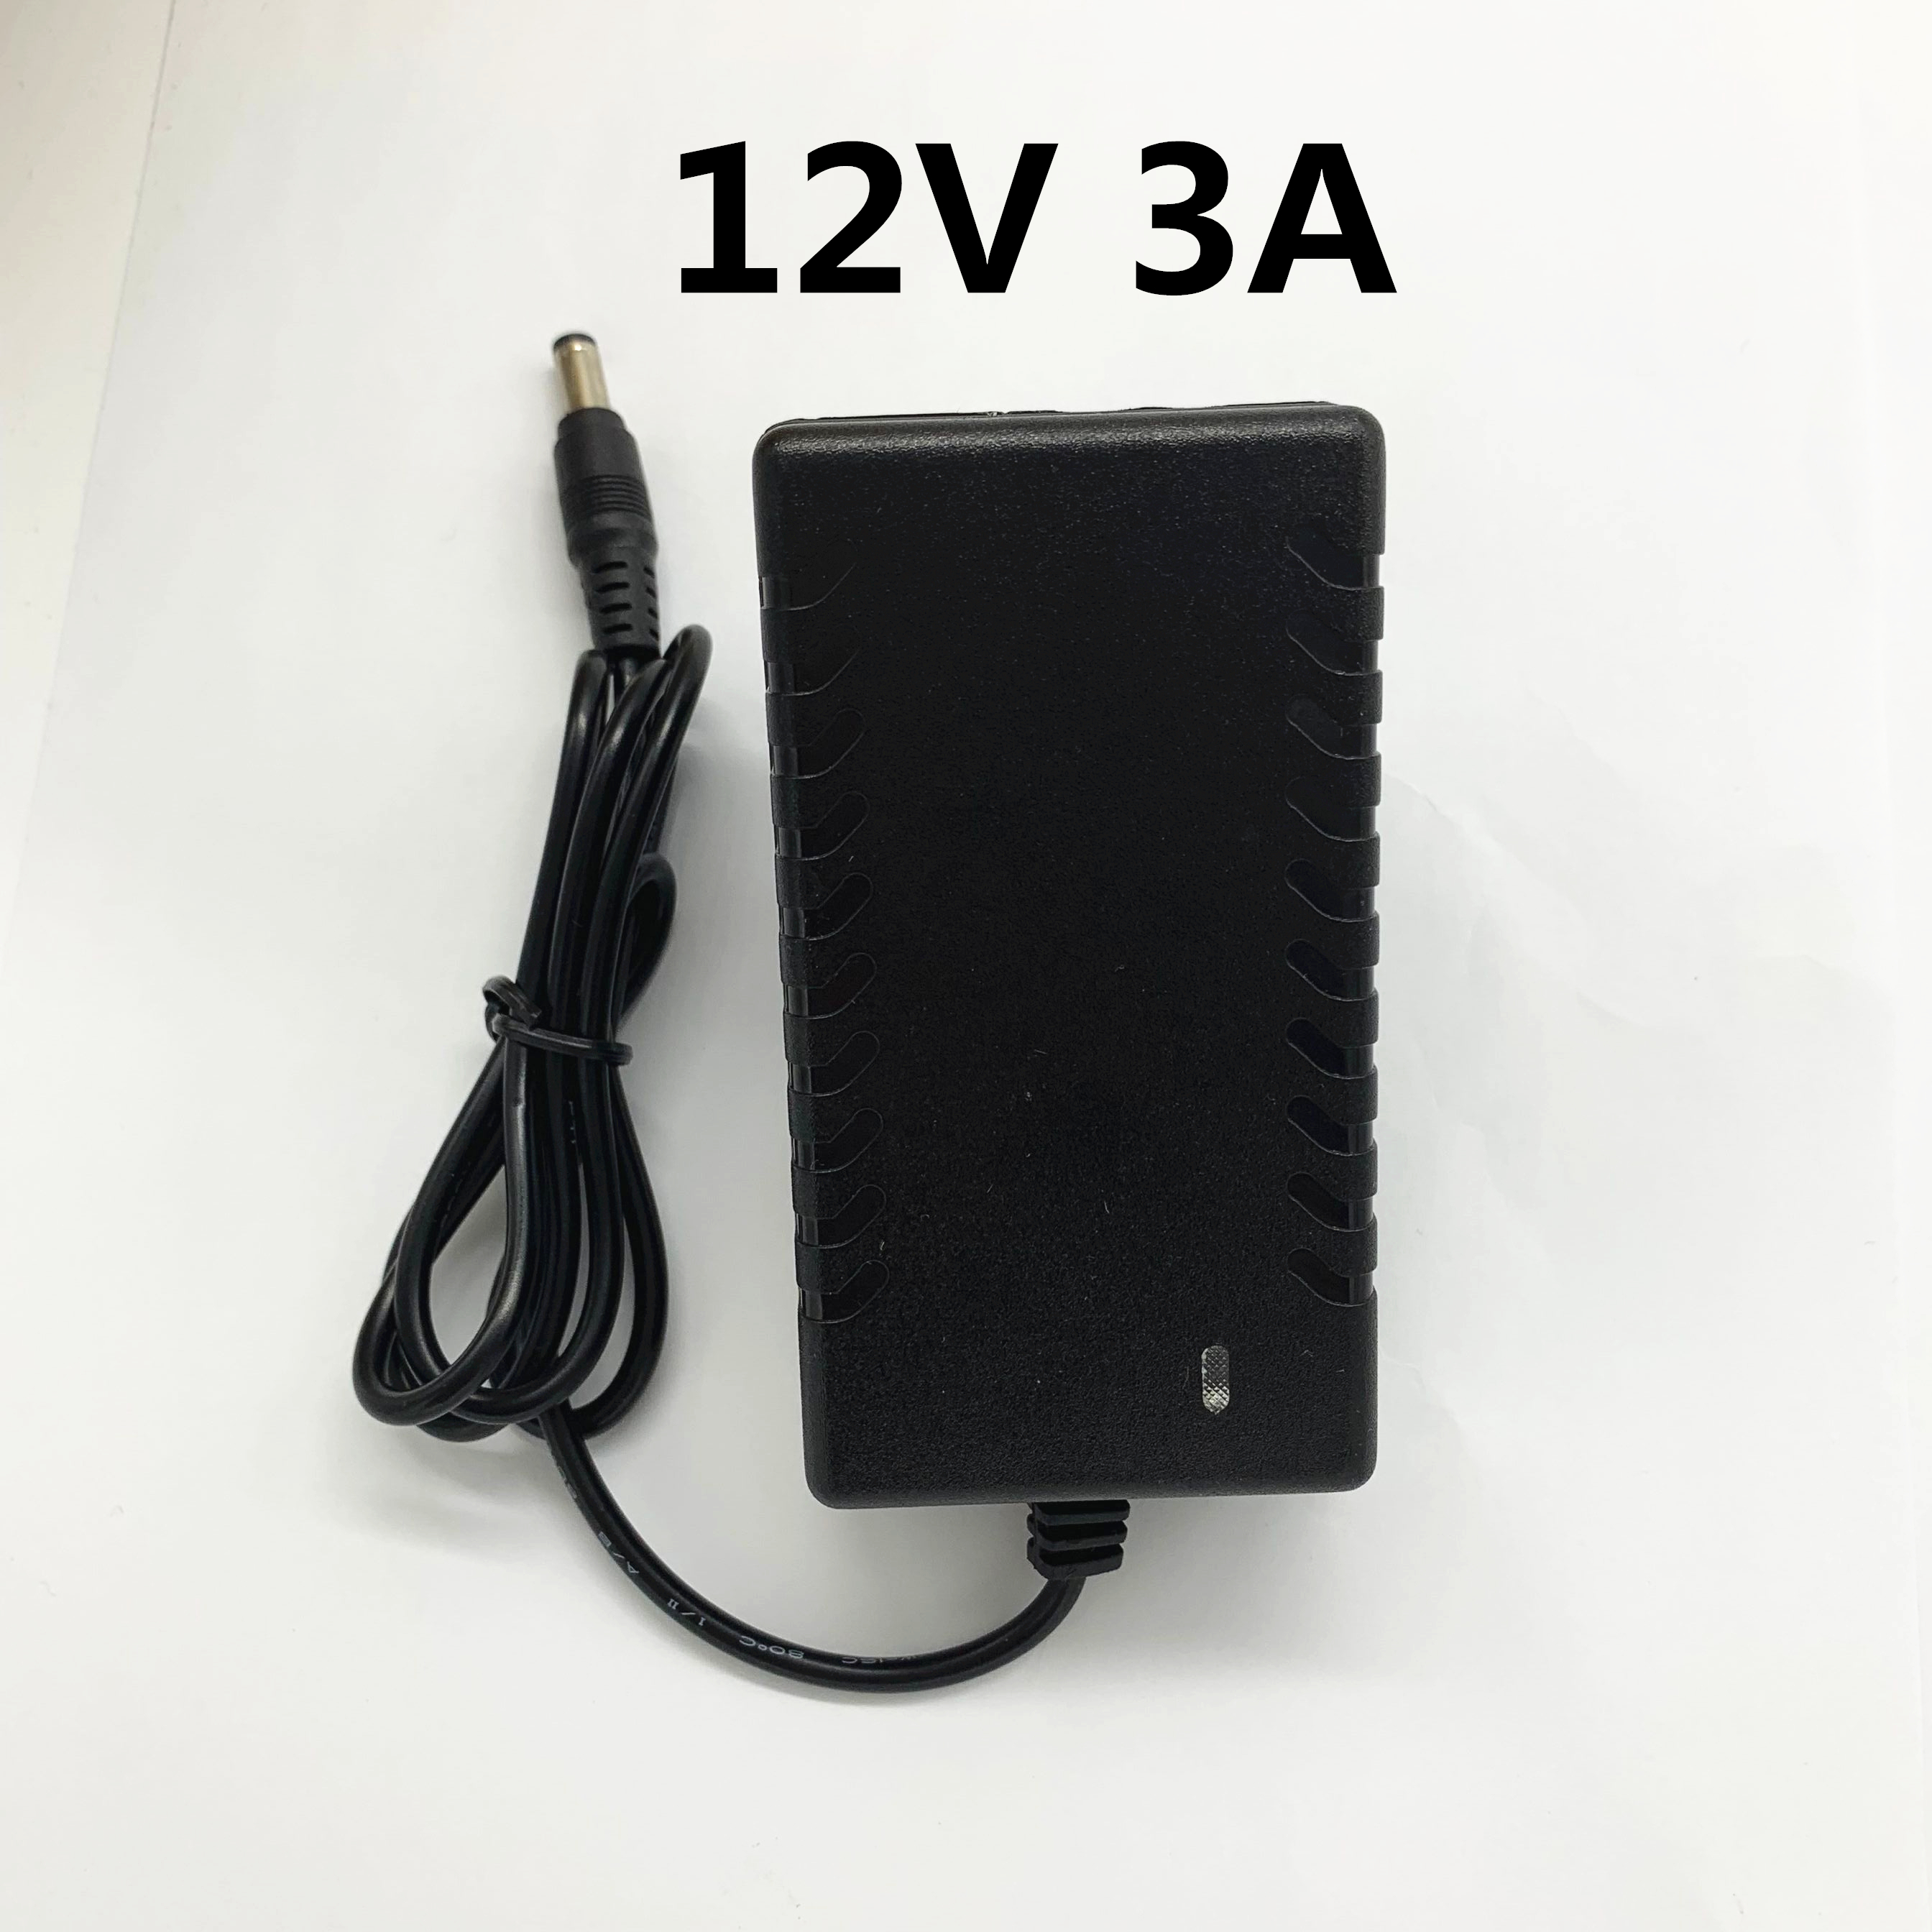 AC 110-240V DC 5V 6V 8V 9V 10V 12V 15V 0.5A 1A 2A 3A Universal Power Adapter Supply Charger adapter Eu Us for LED light strips